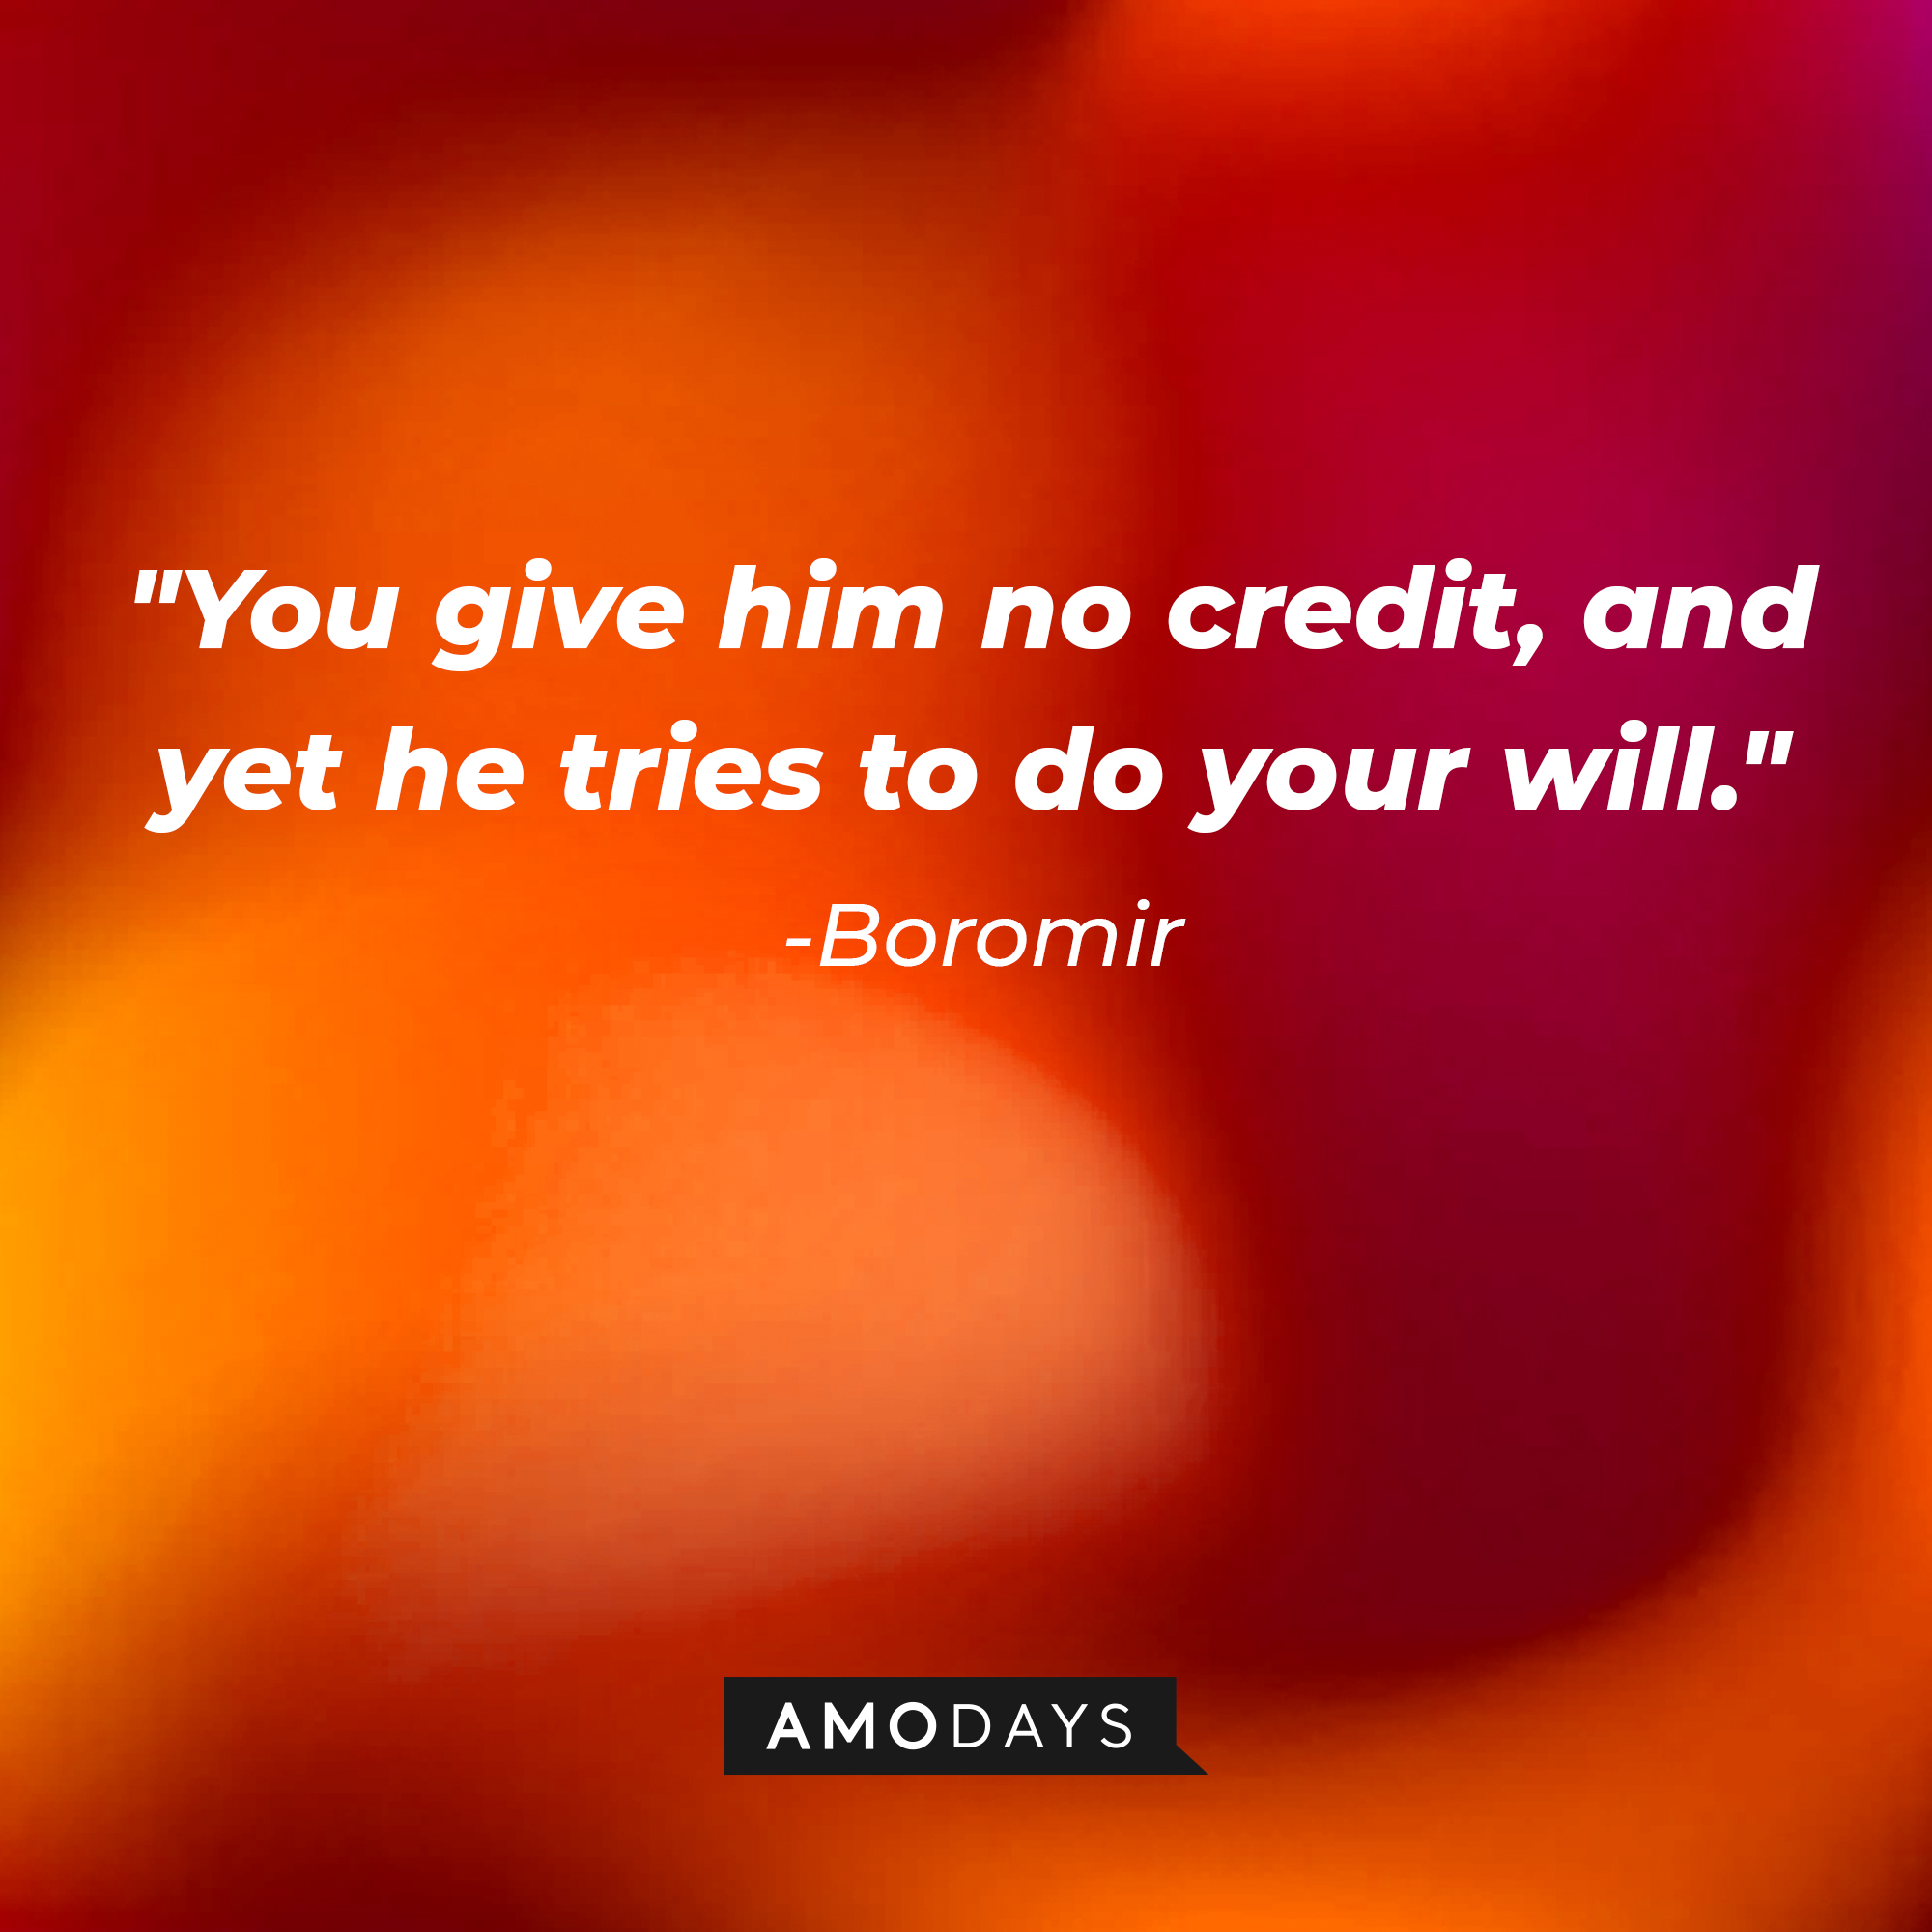 Boromir's quote: "You give him no credit, and yet he tries to do your will." | Source: AmoDays